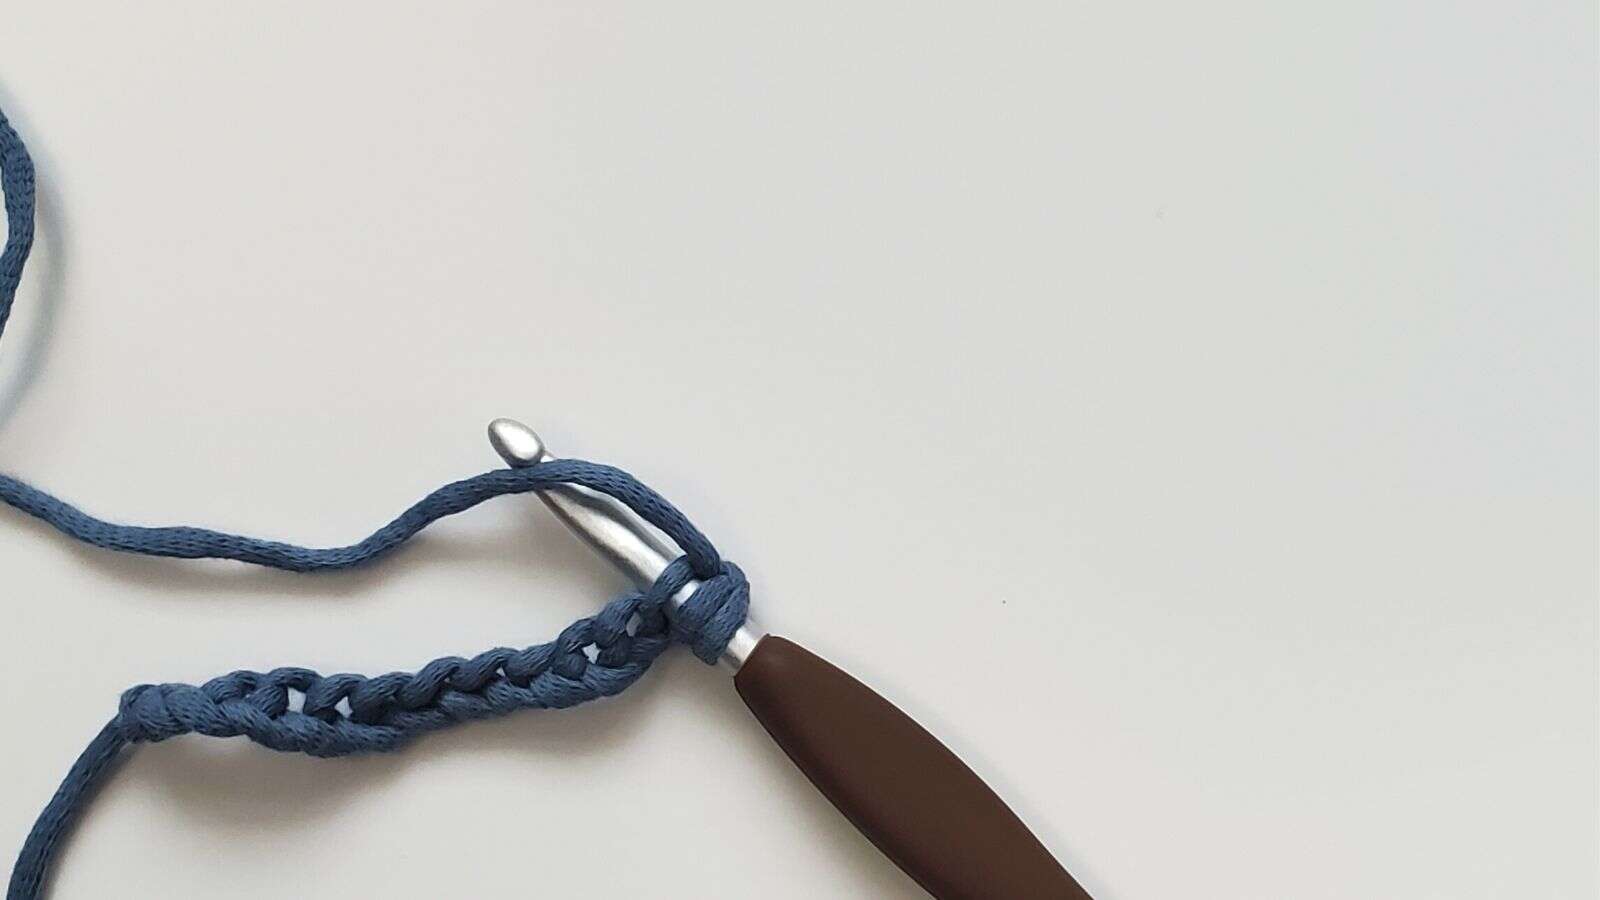 Yarn over your crochet hook after inserting the hook into the 2nd chain space